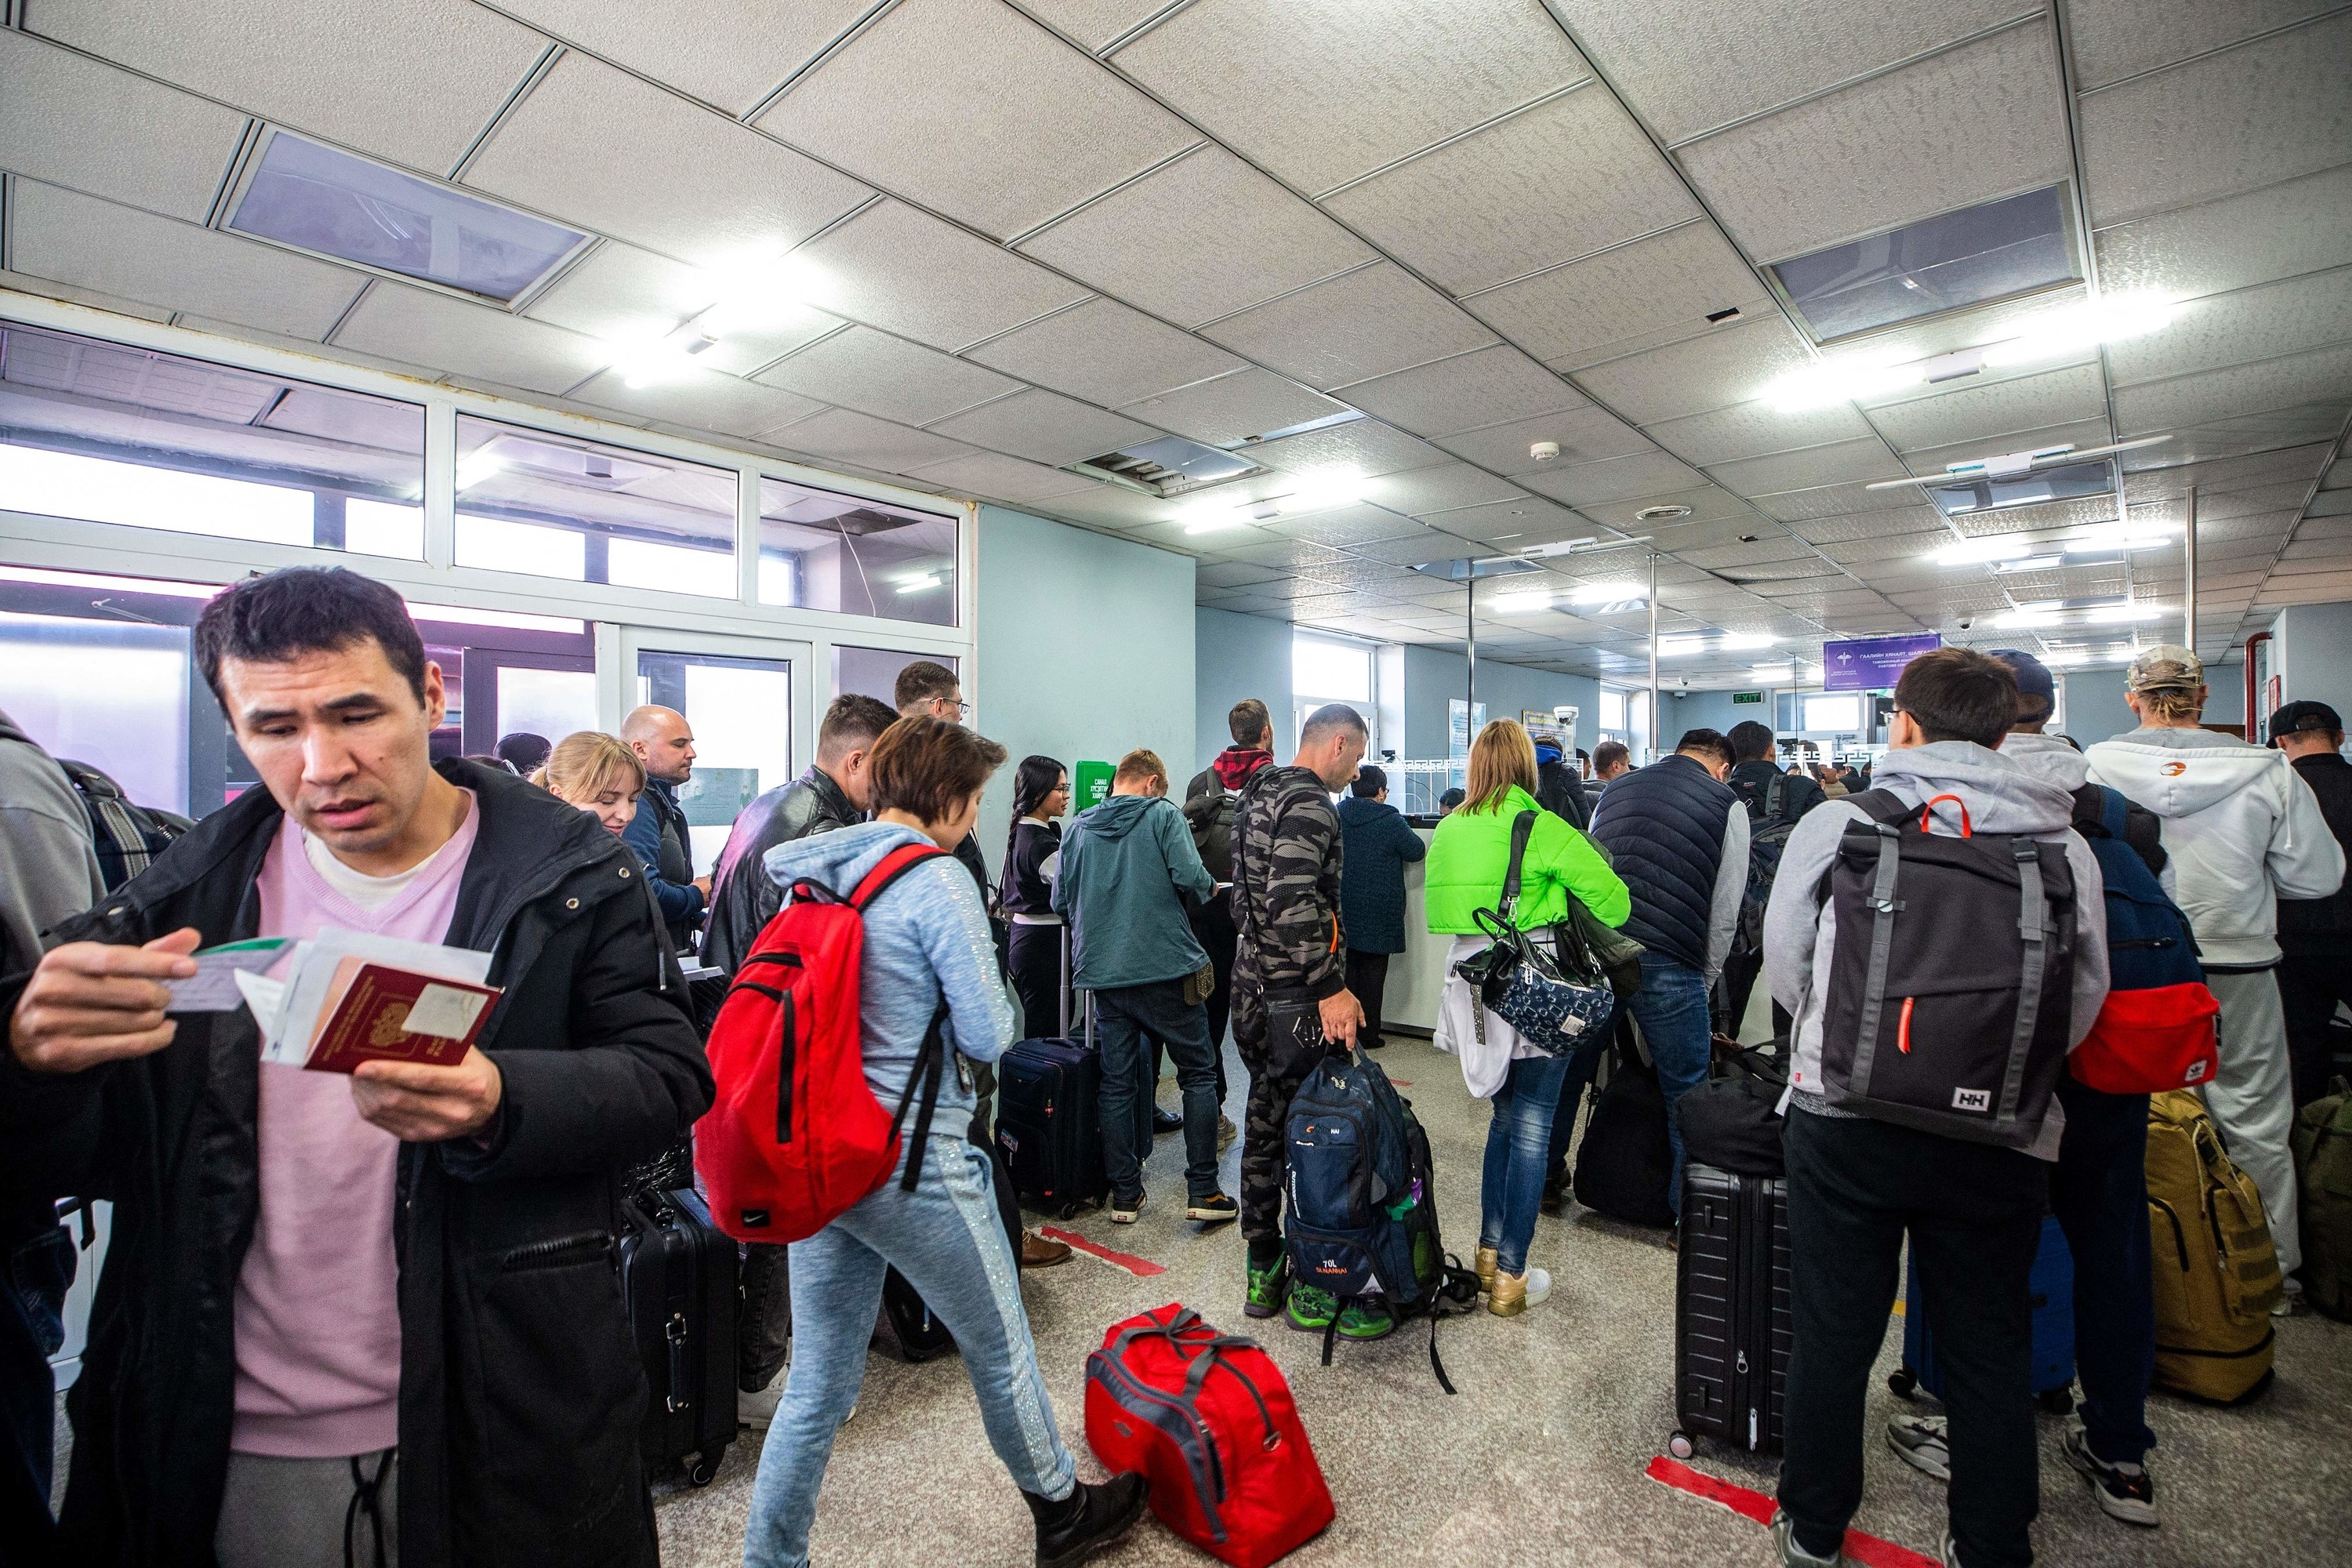 A crowded group of people stand in line with luggage inside a checkpoint facility